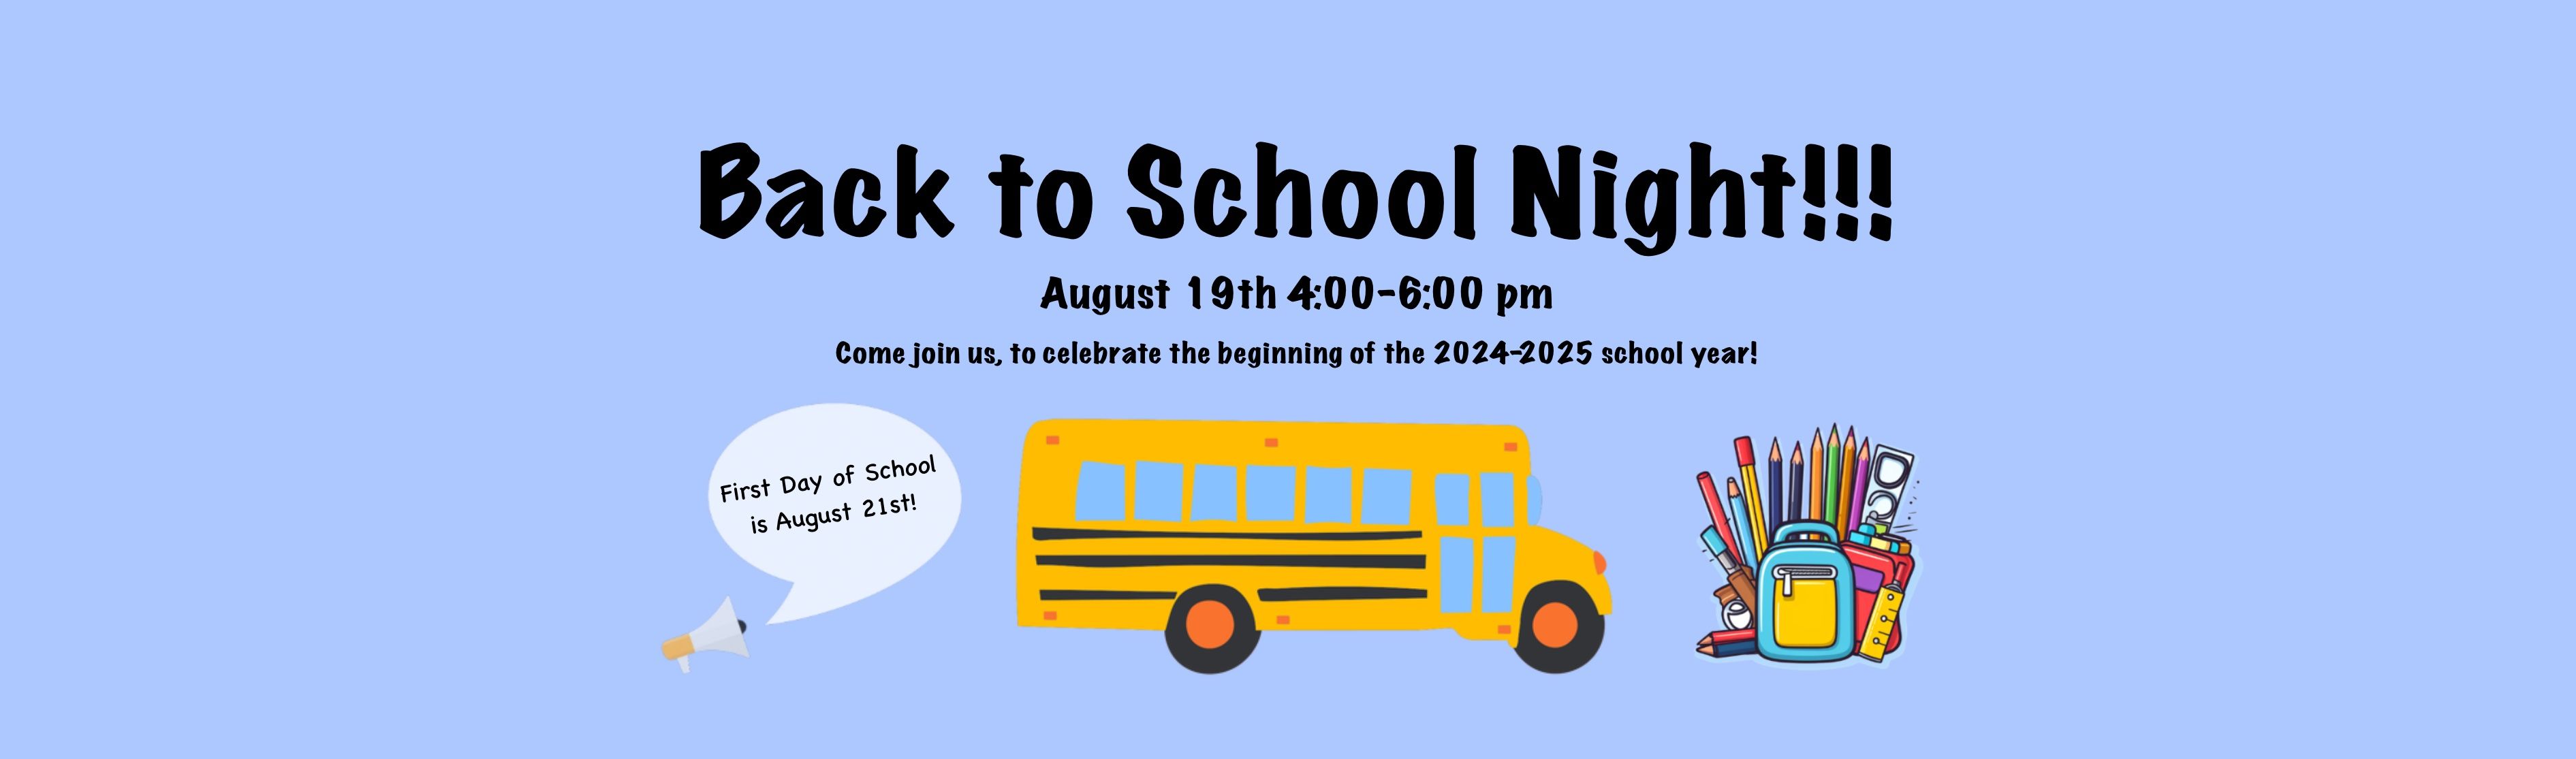 Back to School Night! August 19th from 4:00-6:00 pm. Come join us, to celebrate the beginning of the 2024-2025 school year! First day of school is August 21st!